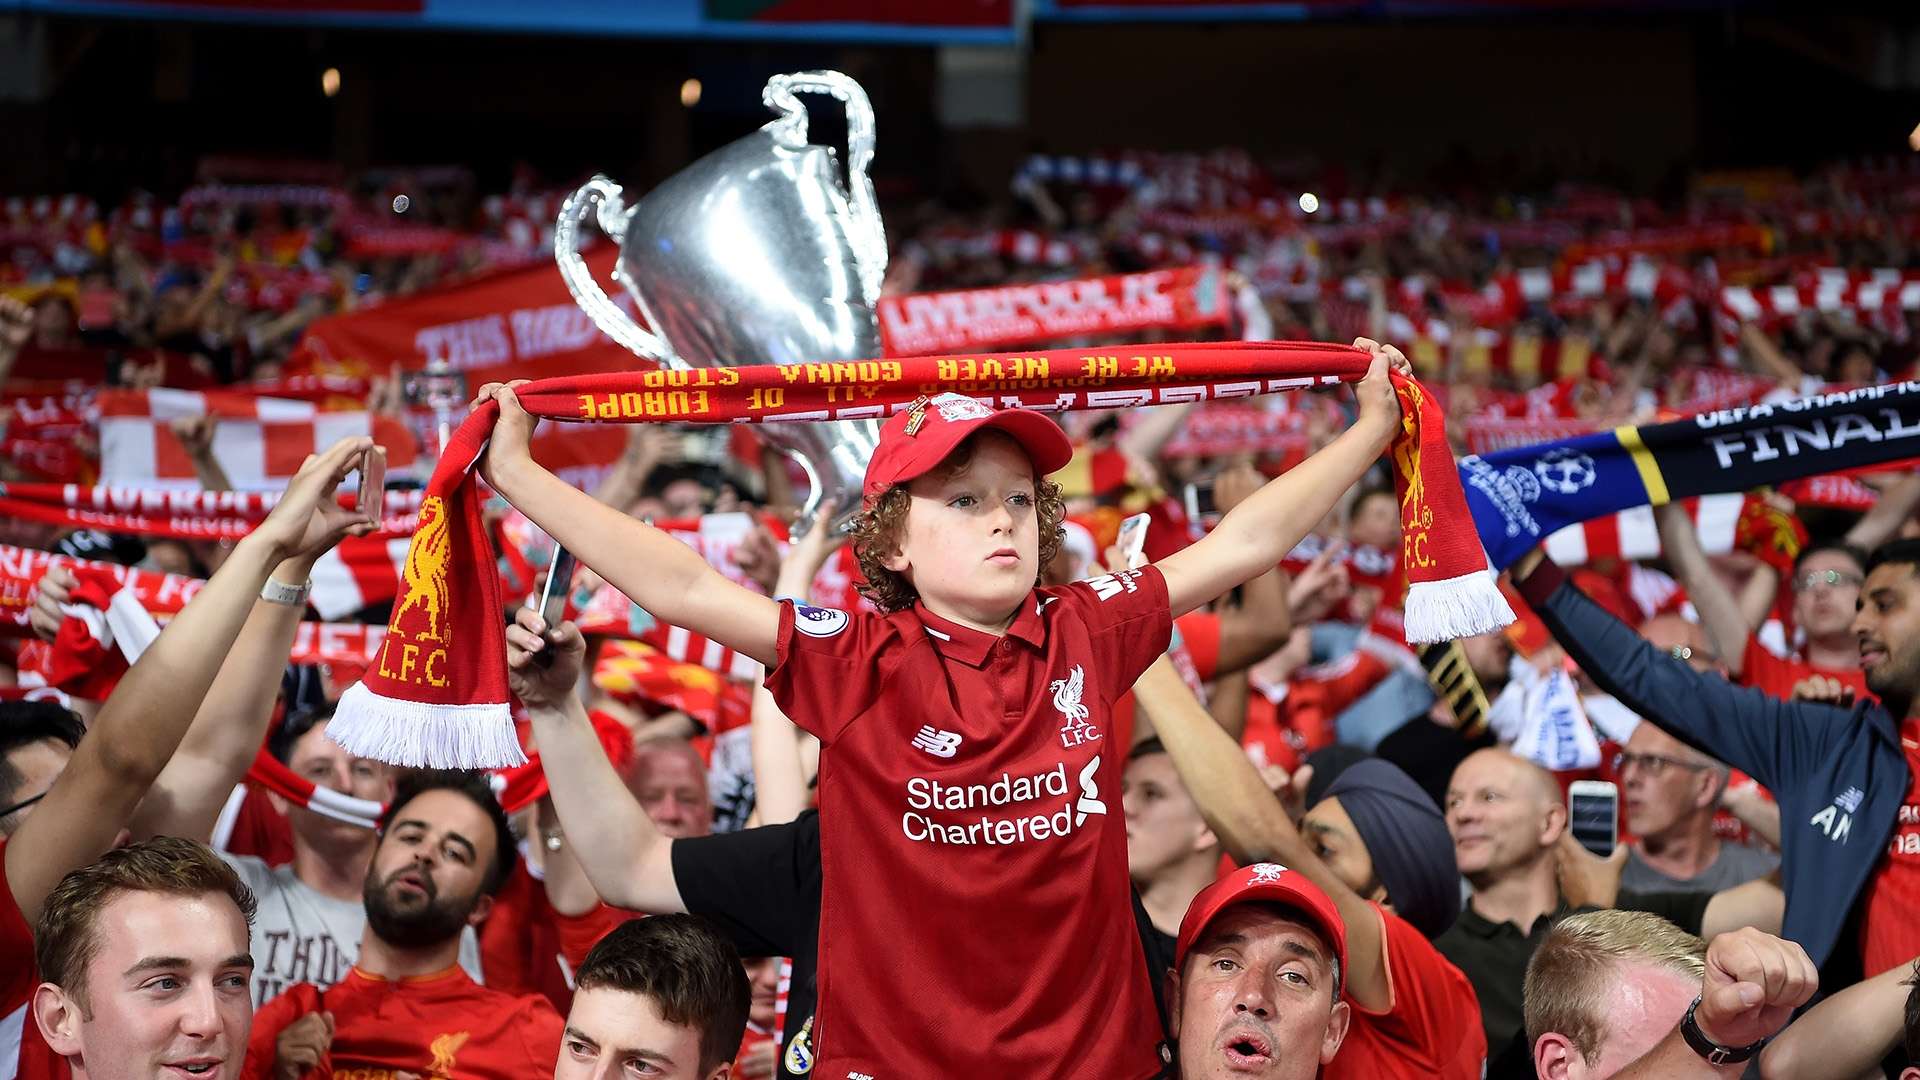 Fans Real Madrid Liverpool Champions League final 26052018